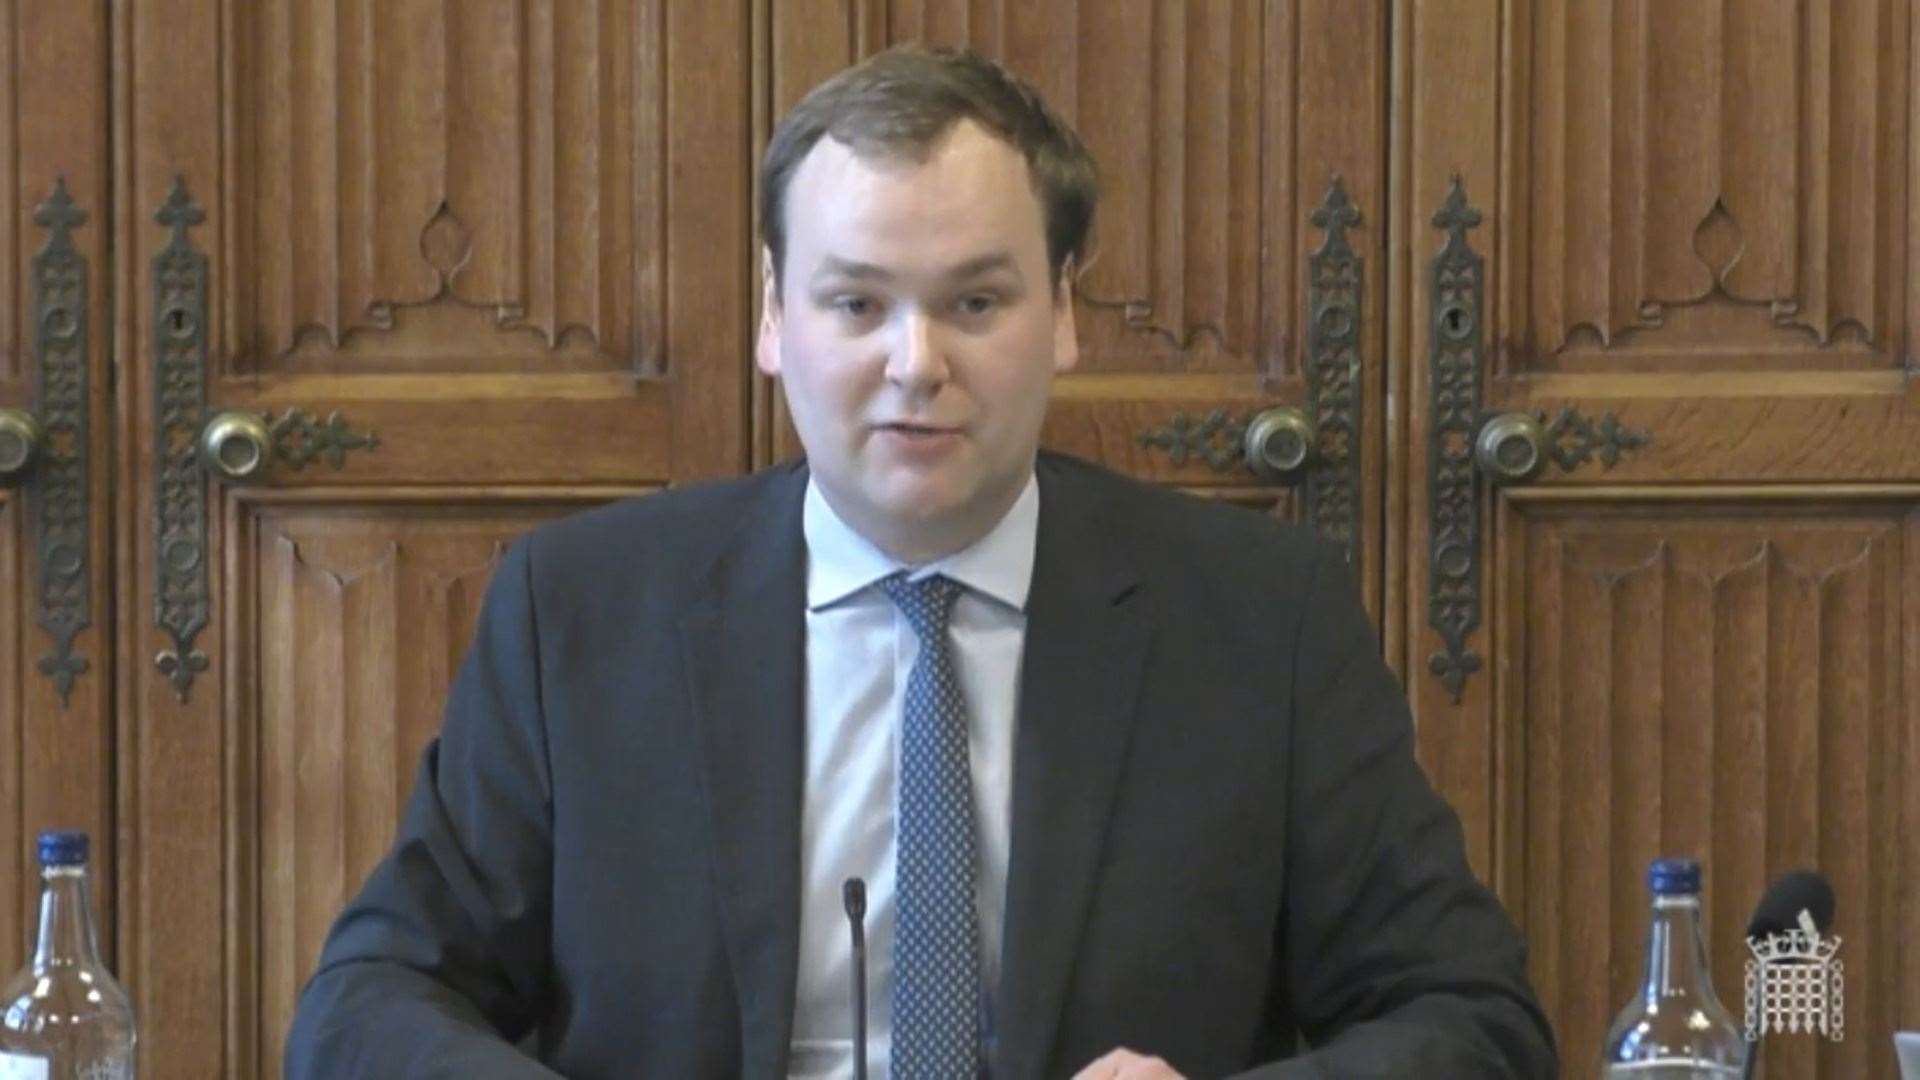 William Wragg is due to speak to police about his concerns (Parliament TV/PA)